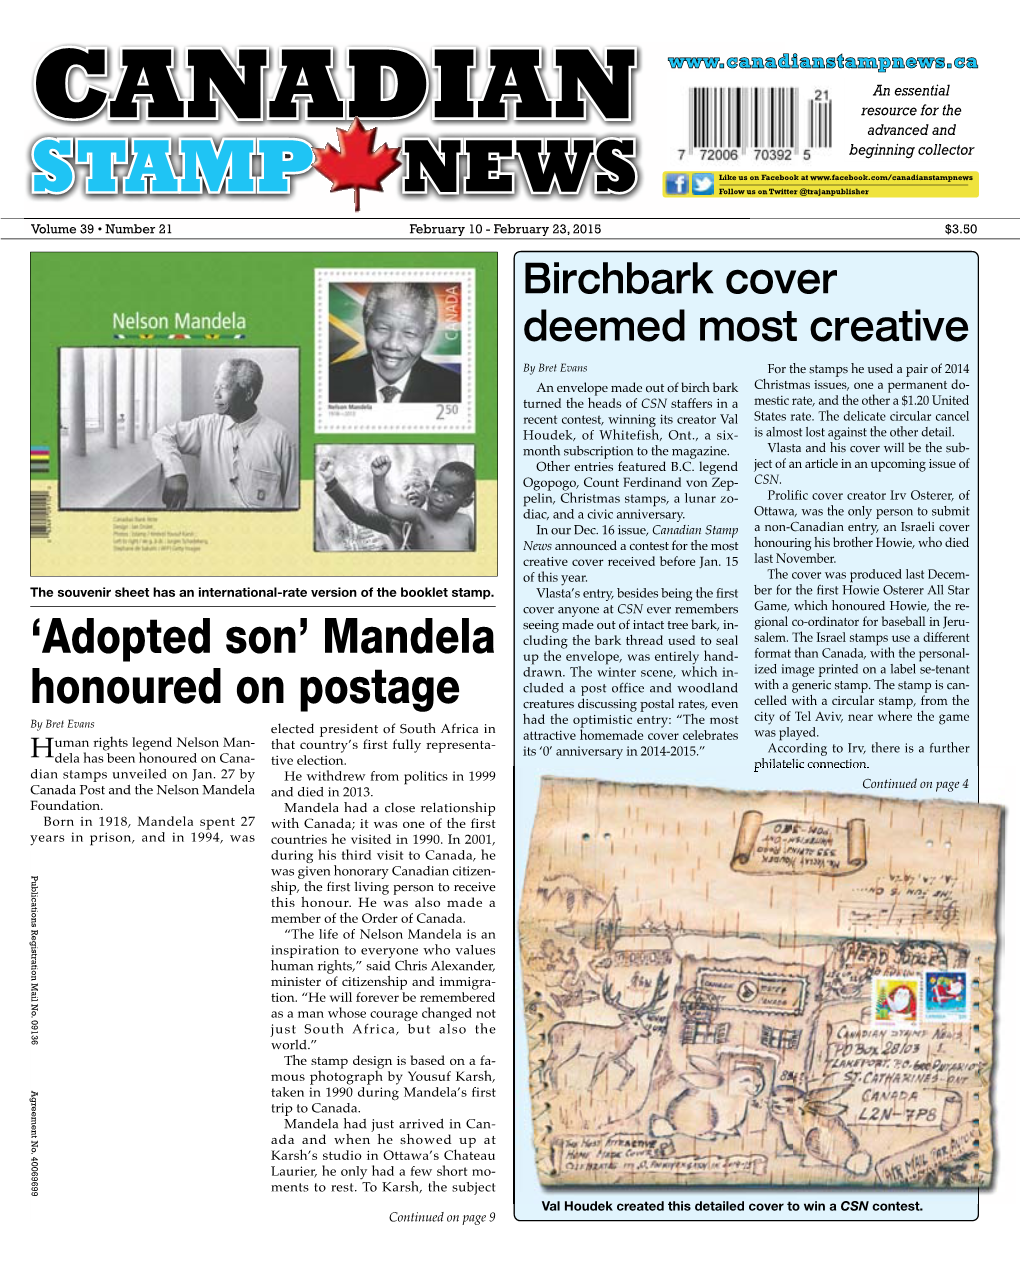 Canadianstampnews.Ca an Essential Resource for the Canadian Advanced and Beginning Collector